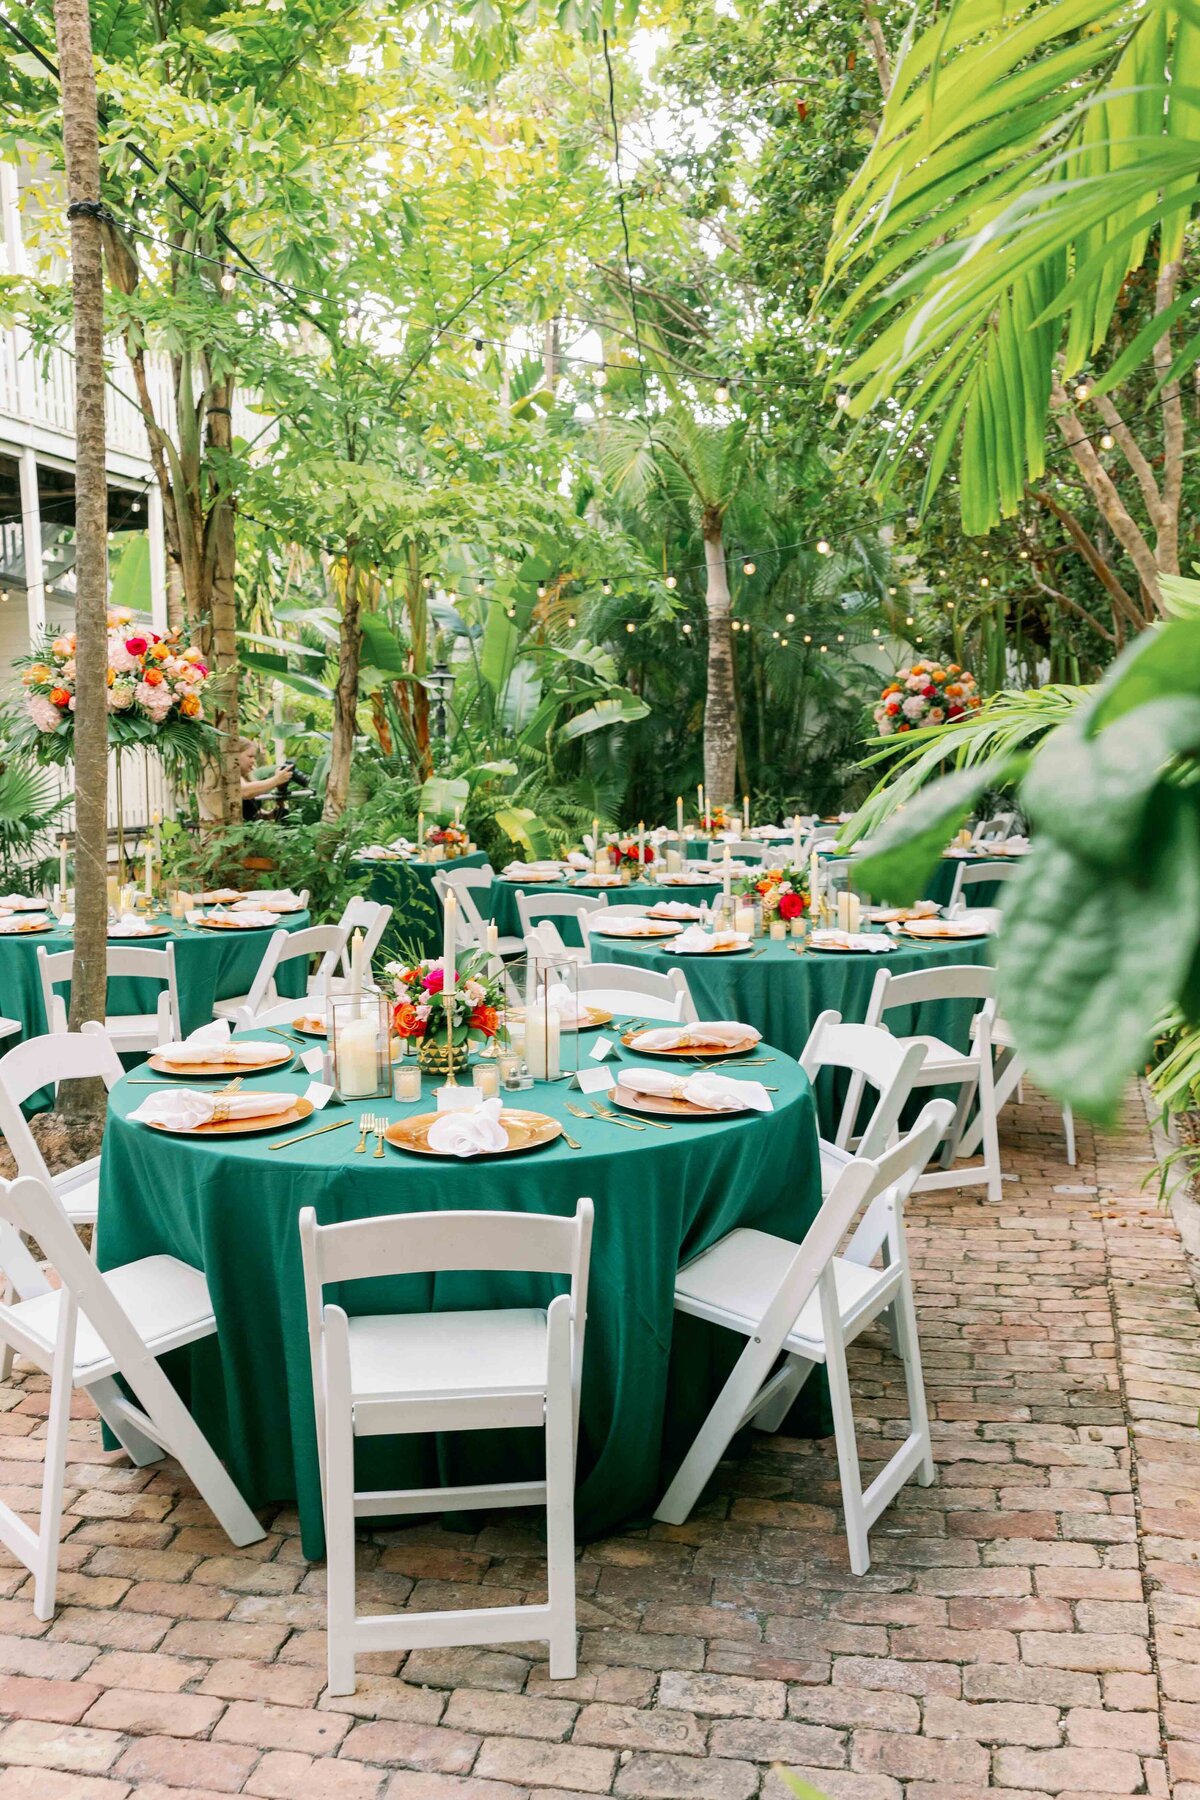 A wedding reception at Old Town Manor in Key West, Florida